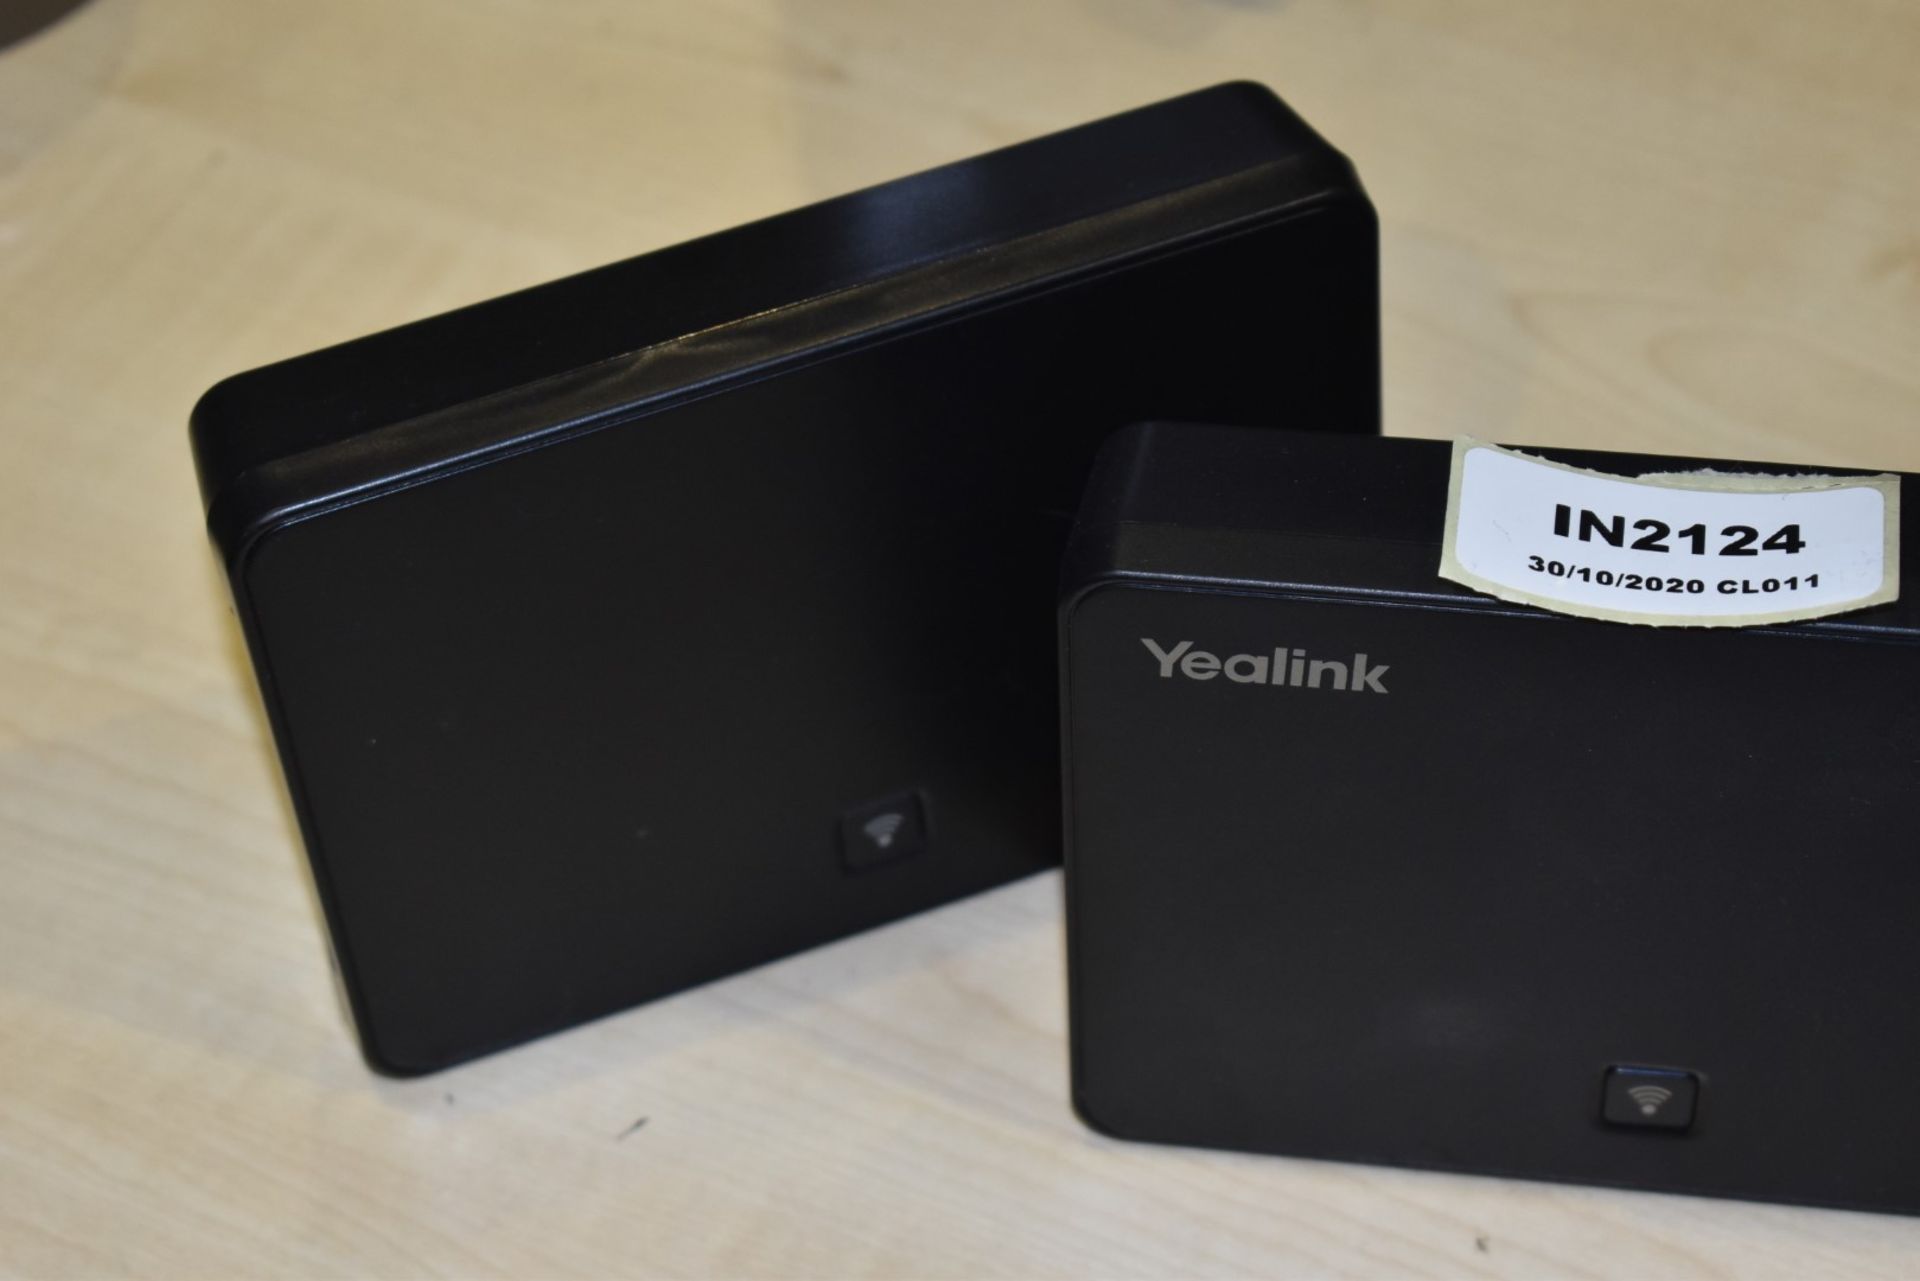 3 x Yealink IP Dect Phone Model W52P - Includes One PSU Only - Ref: In2124 wh1 pal1 - CL011 - - Image 4 of 7